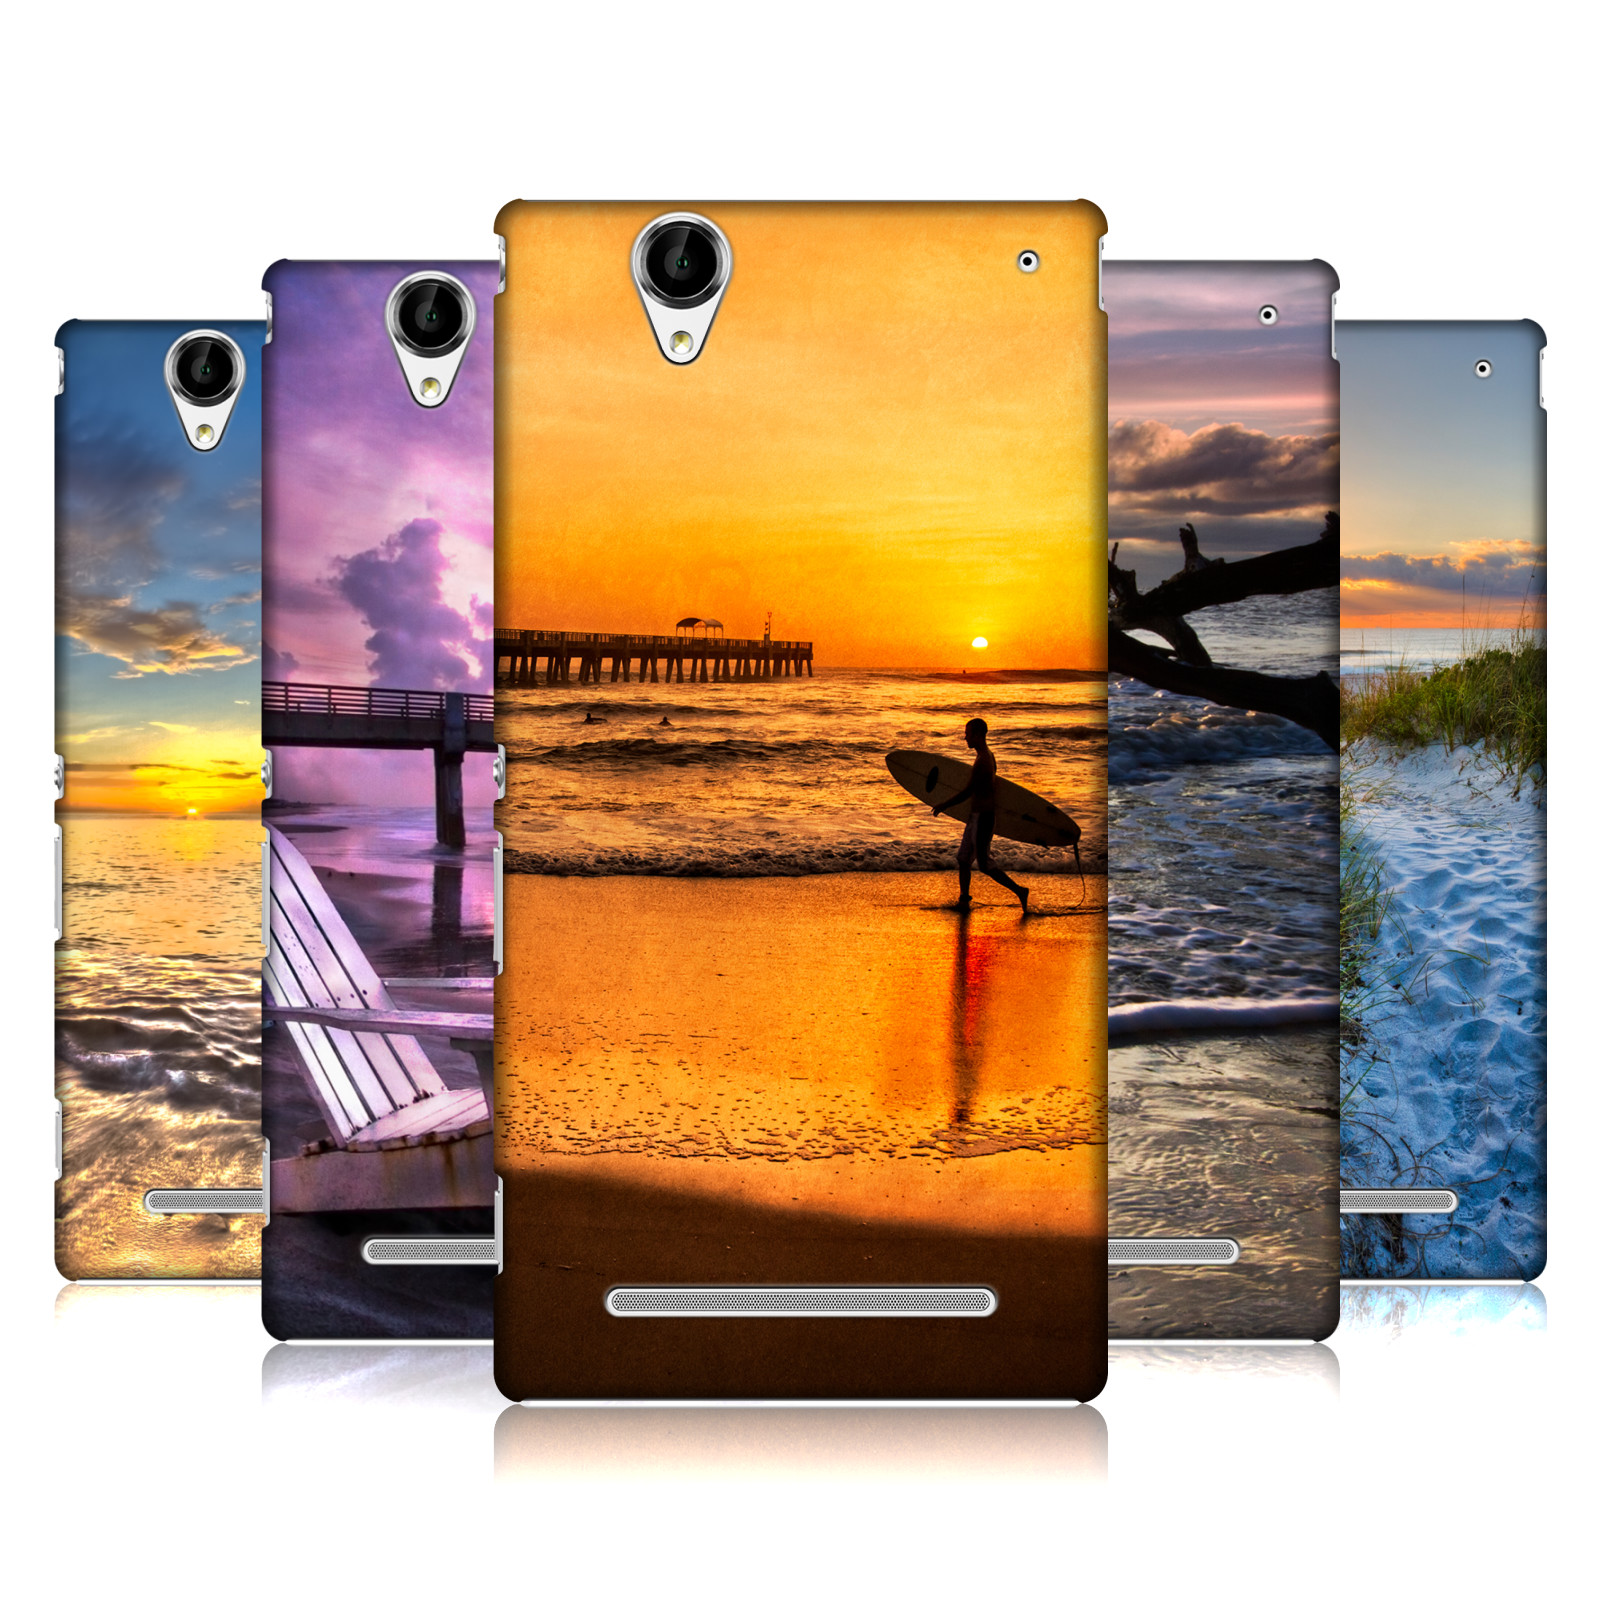 OFFICIAL CELEBRATE LIFE GALLERY BEACHES HARD BACK CASE FOR SONY PHONES 3